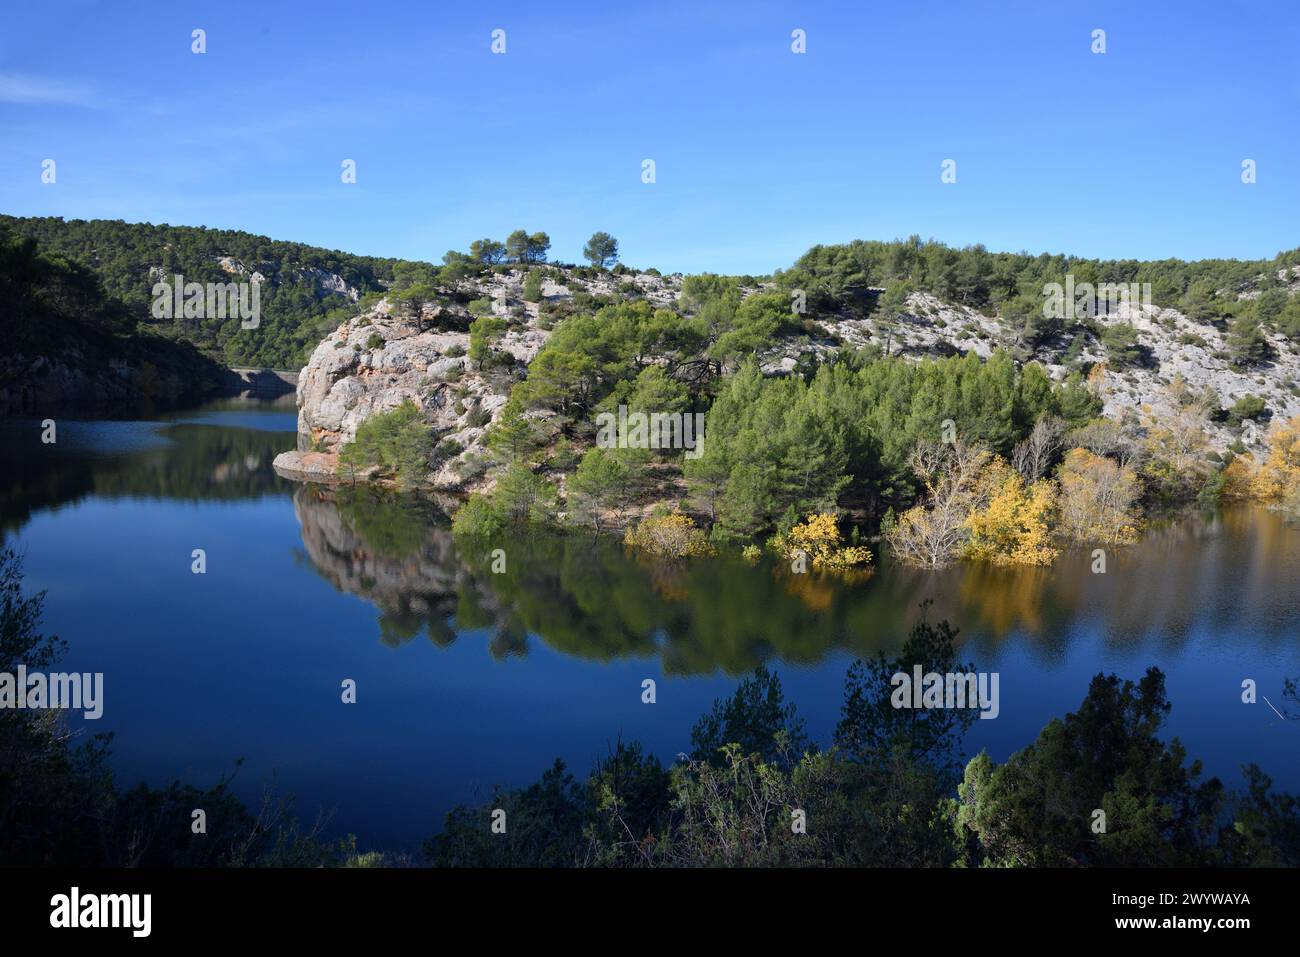 Lac Zola or Zola Lake and Barrage or Dam in the Infernet Gorge to the west of Mont Sainte Victoire Mountain Le Tholonet Aix-en-Provence France Stock Photo